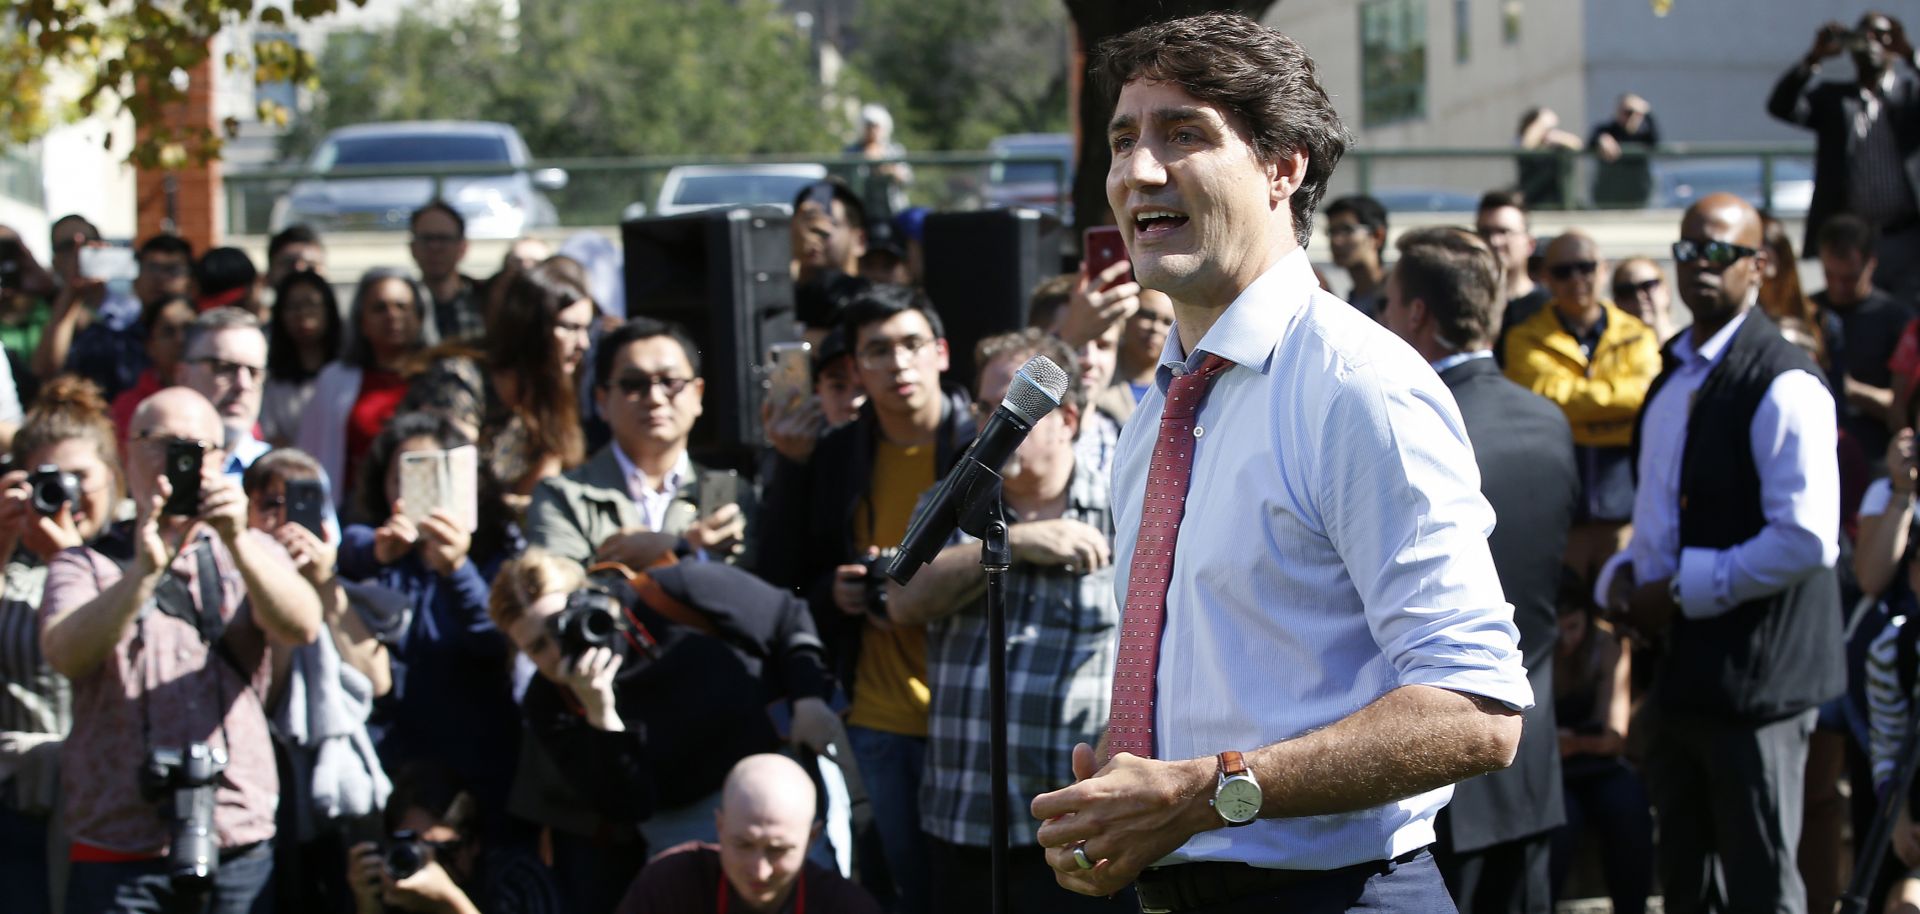 Canadian Prime Minister Justin Trudeau addresses the media in Winnipeg, Manitoba, on Sept. 19, 2019, regarding photos and video that have surfaced in which he is wearing dark makeup.